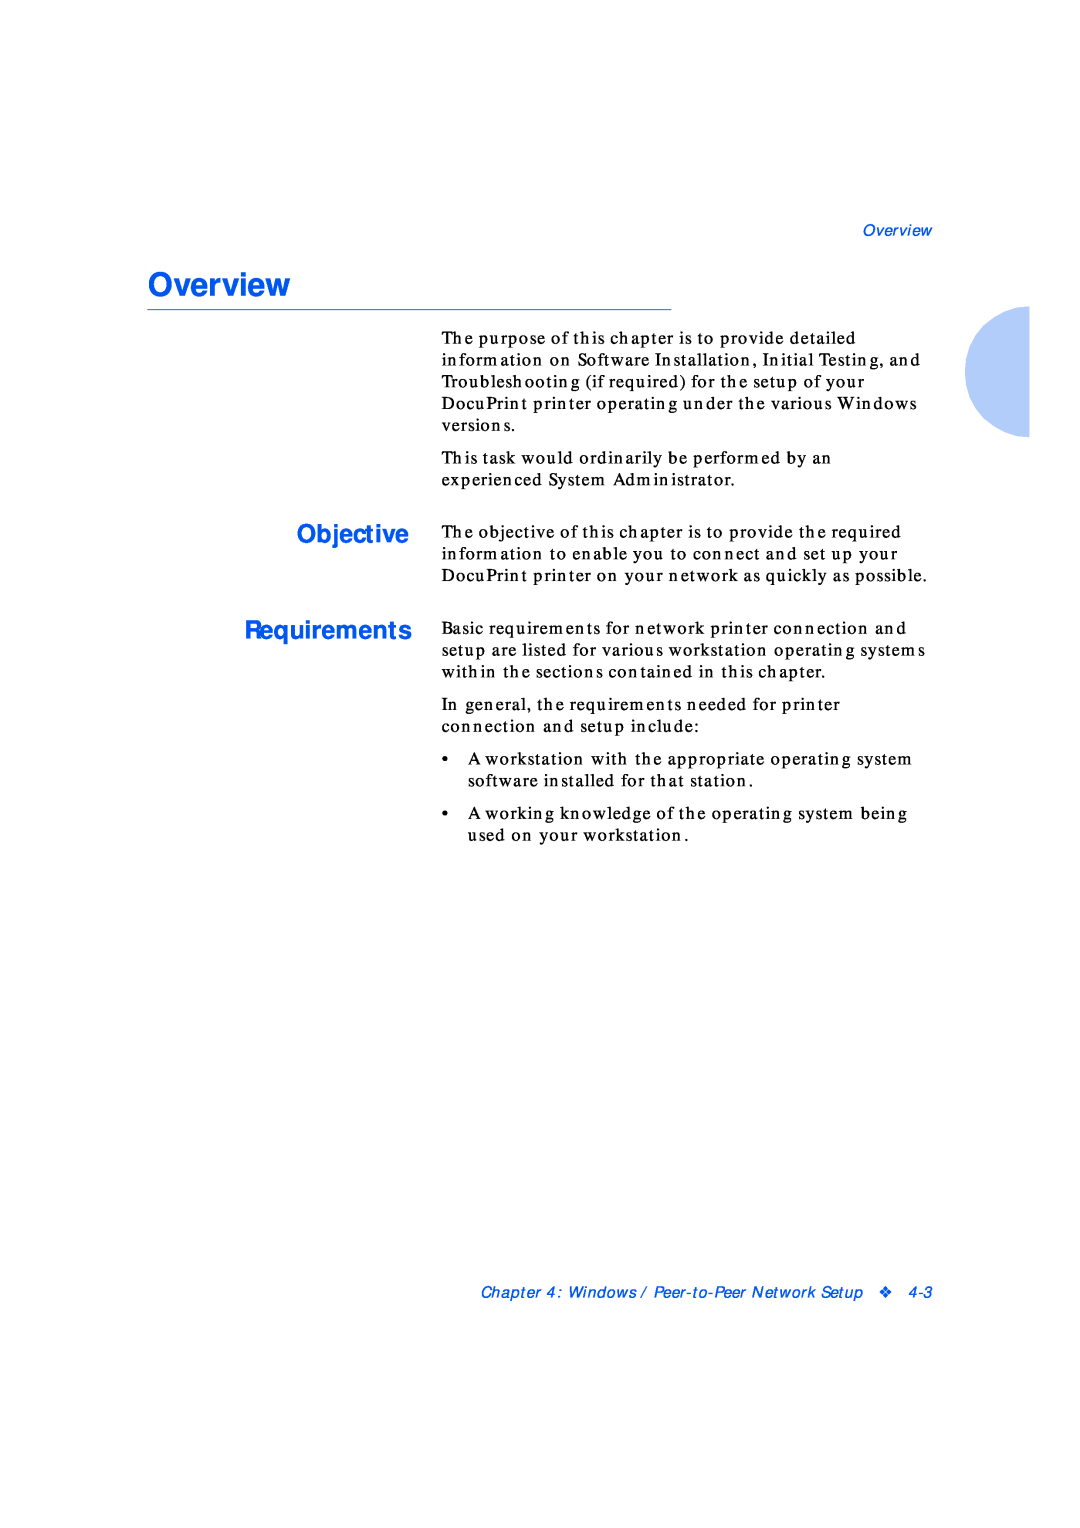 Xerox Network Laser Printers manual Objective Requirements, Overview 